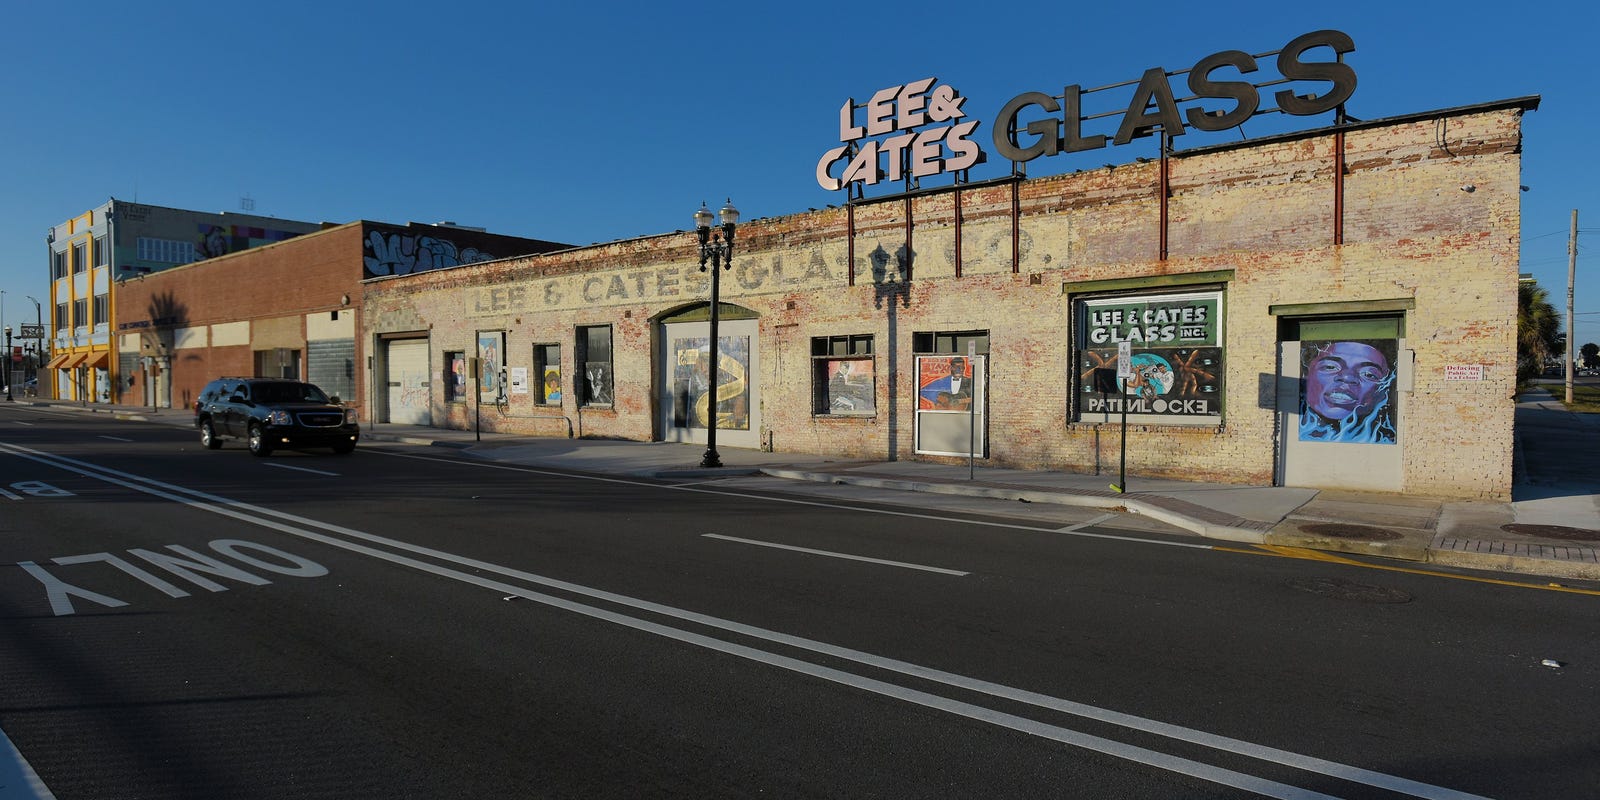 Jacksonville history: Lee & Cates building has long history in LaVilla